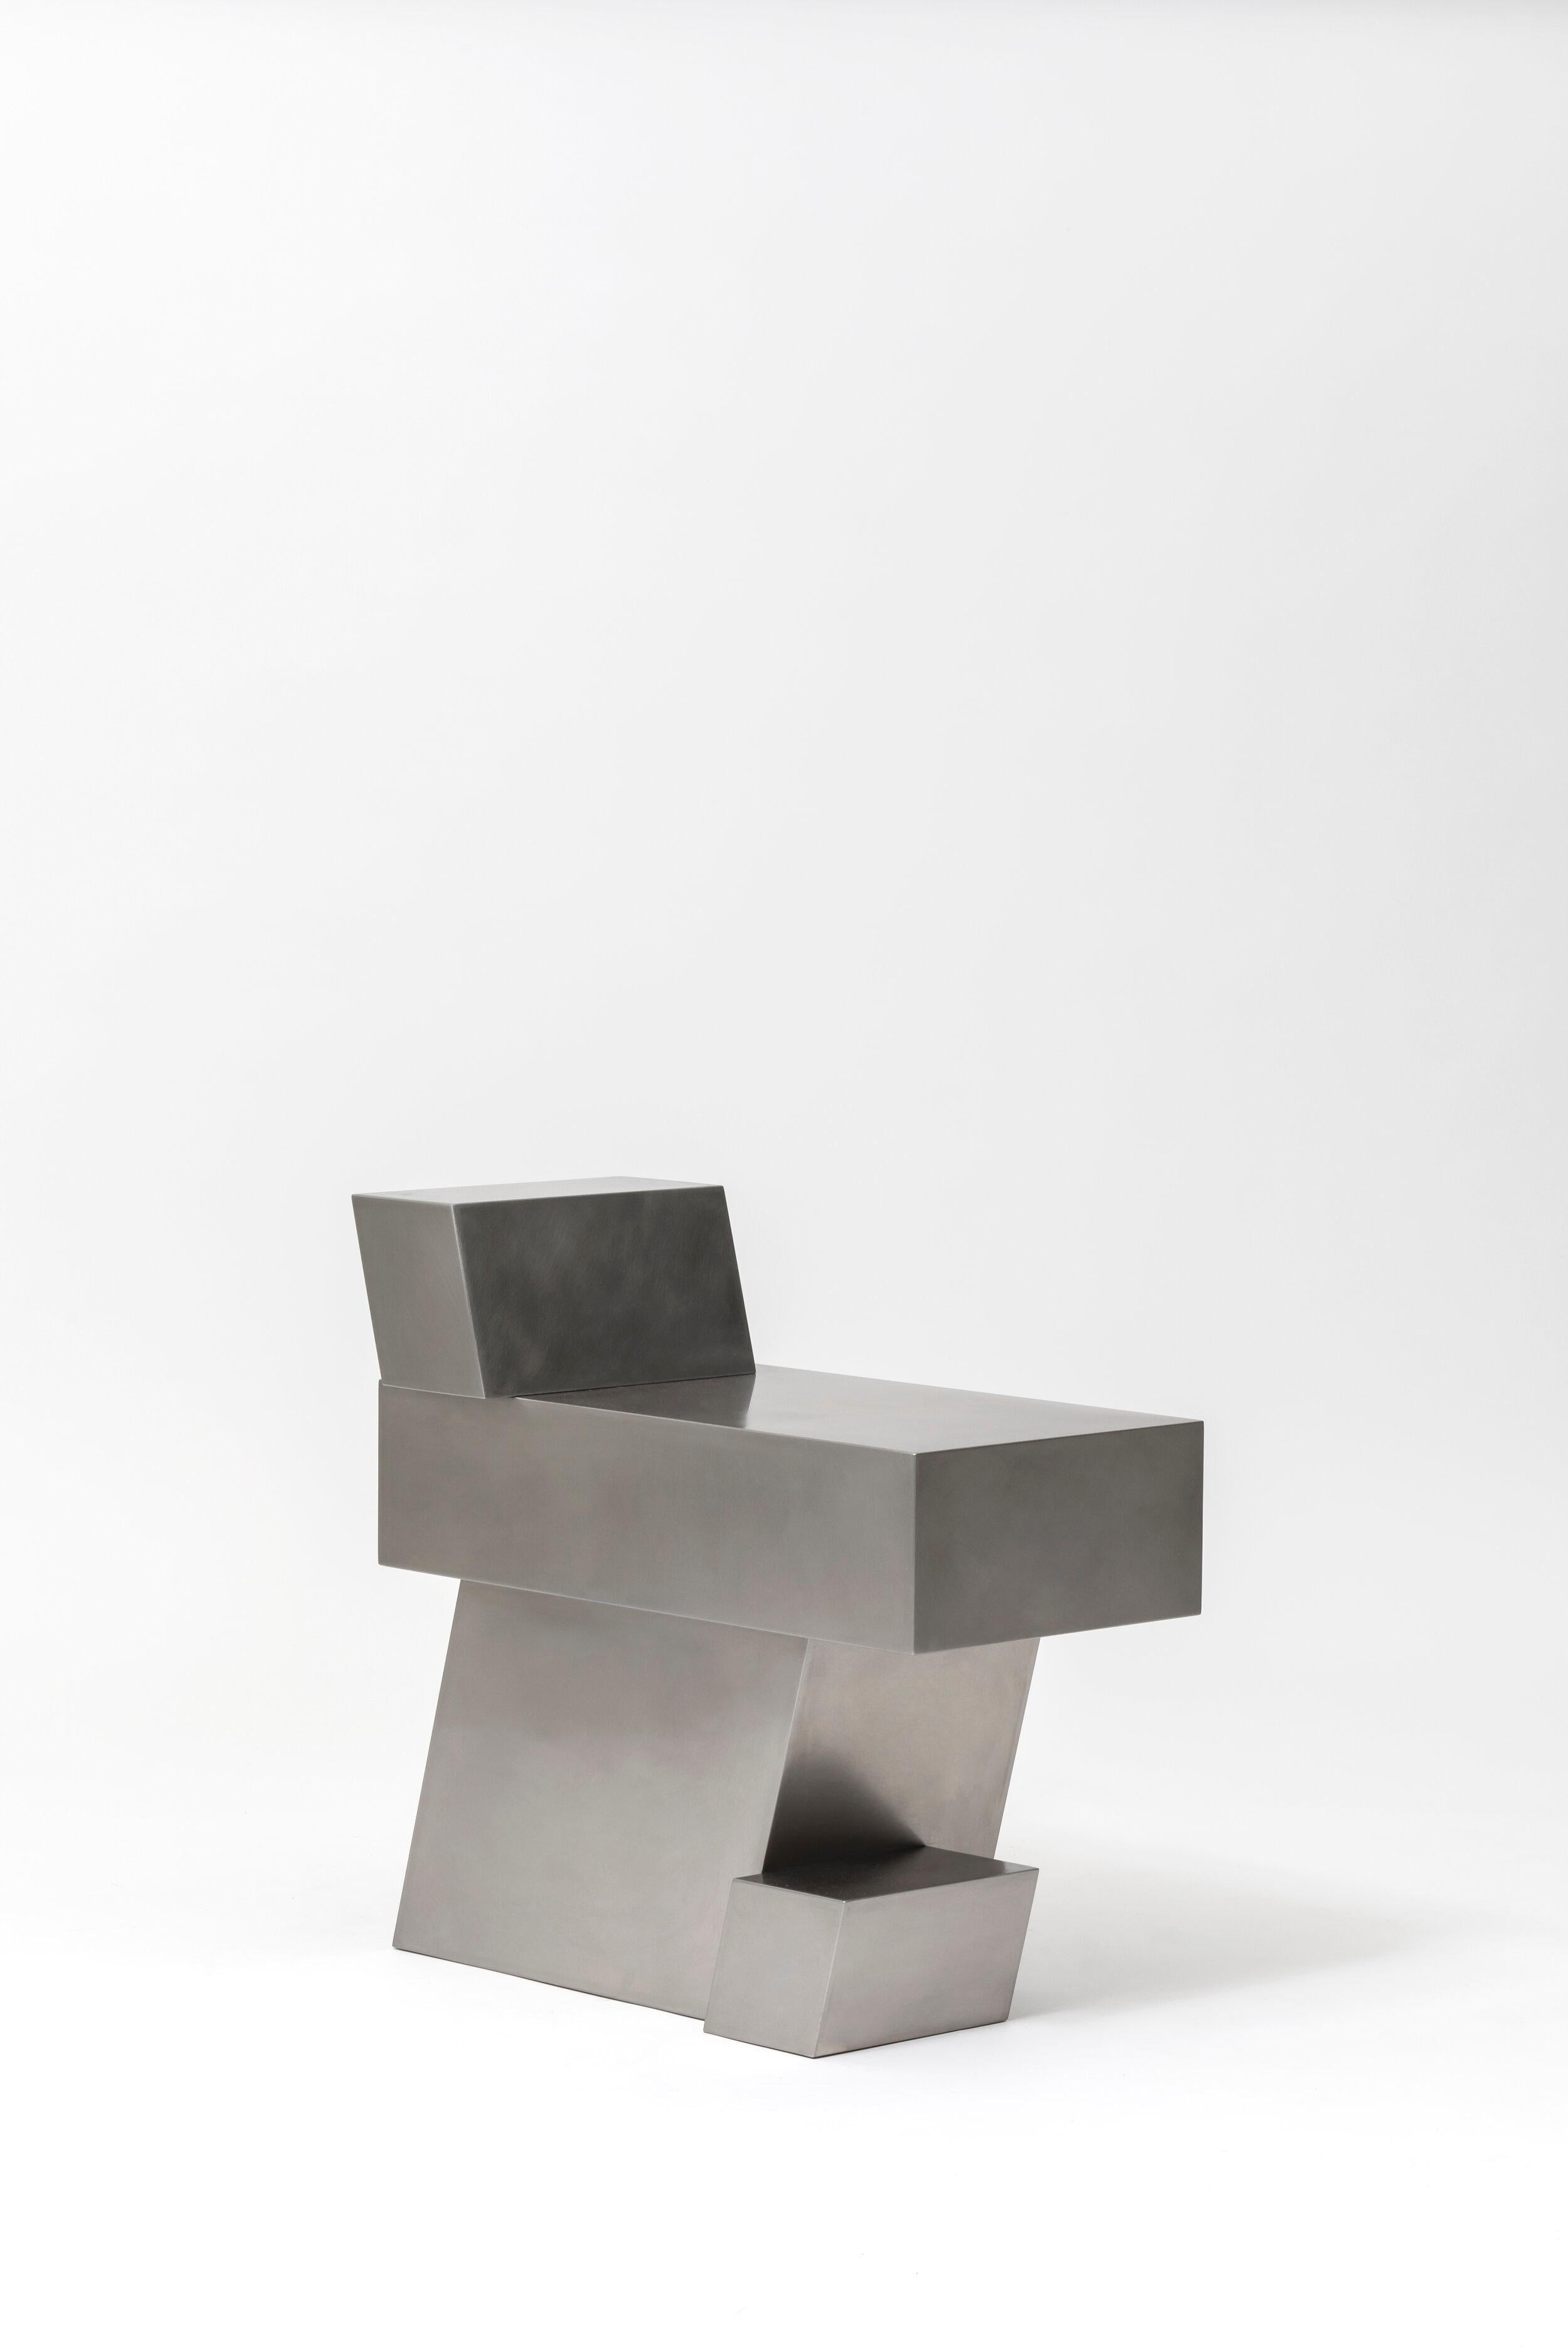 Other Layered Steel Seat XVI by Hyungshin Hwang